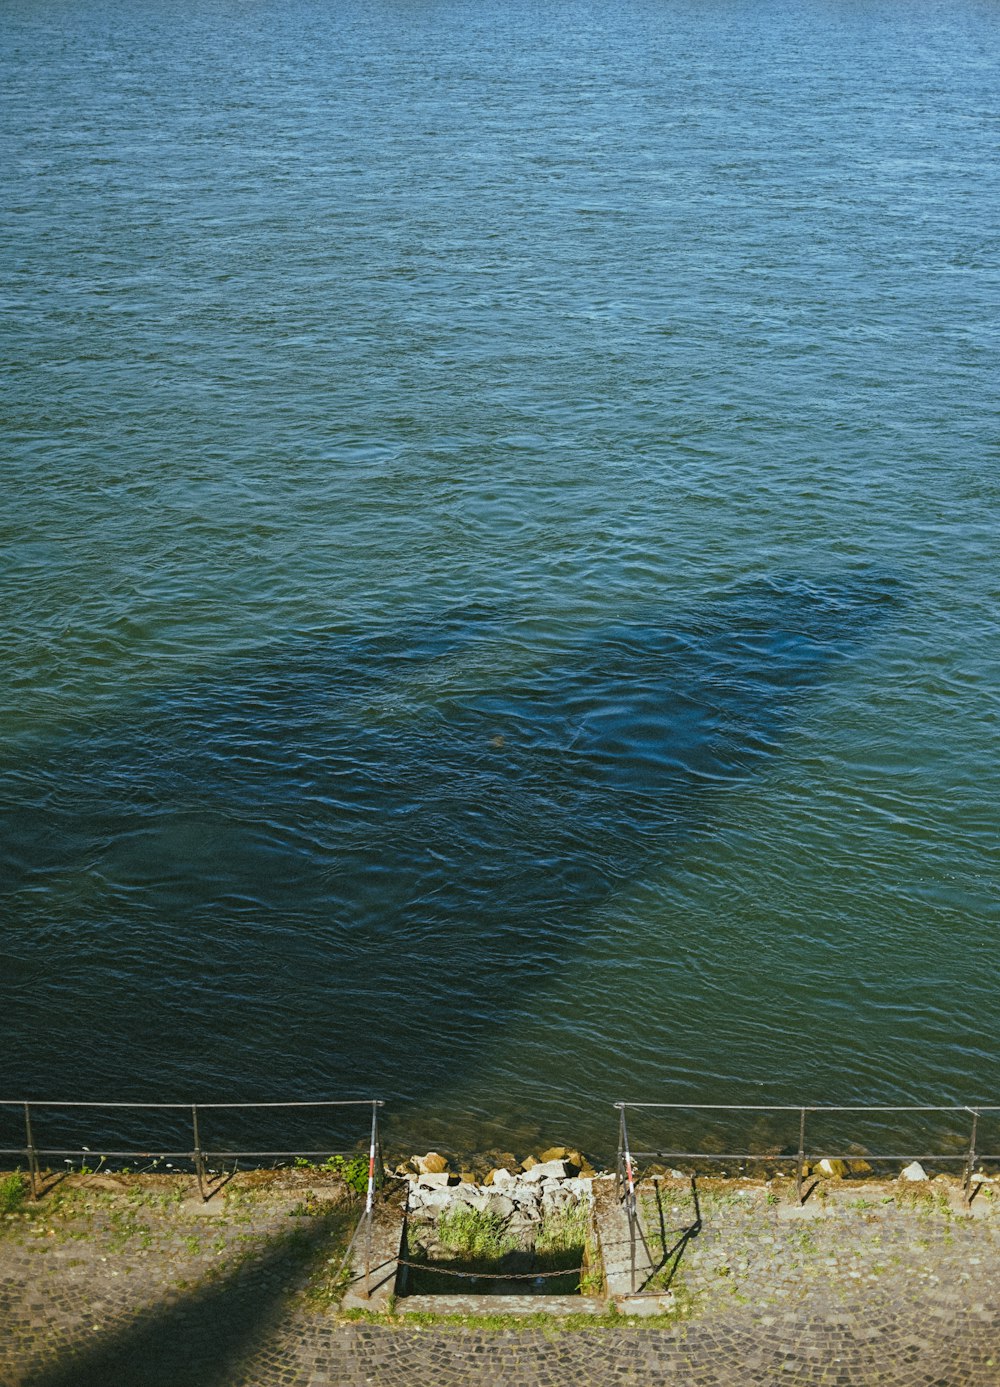 body of water near white metal fence during daytime